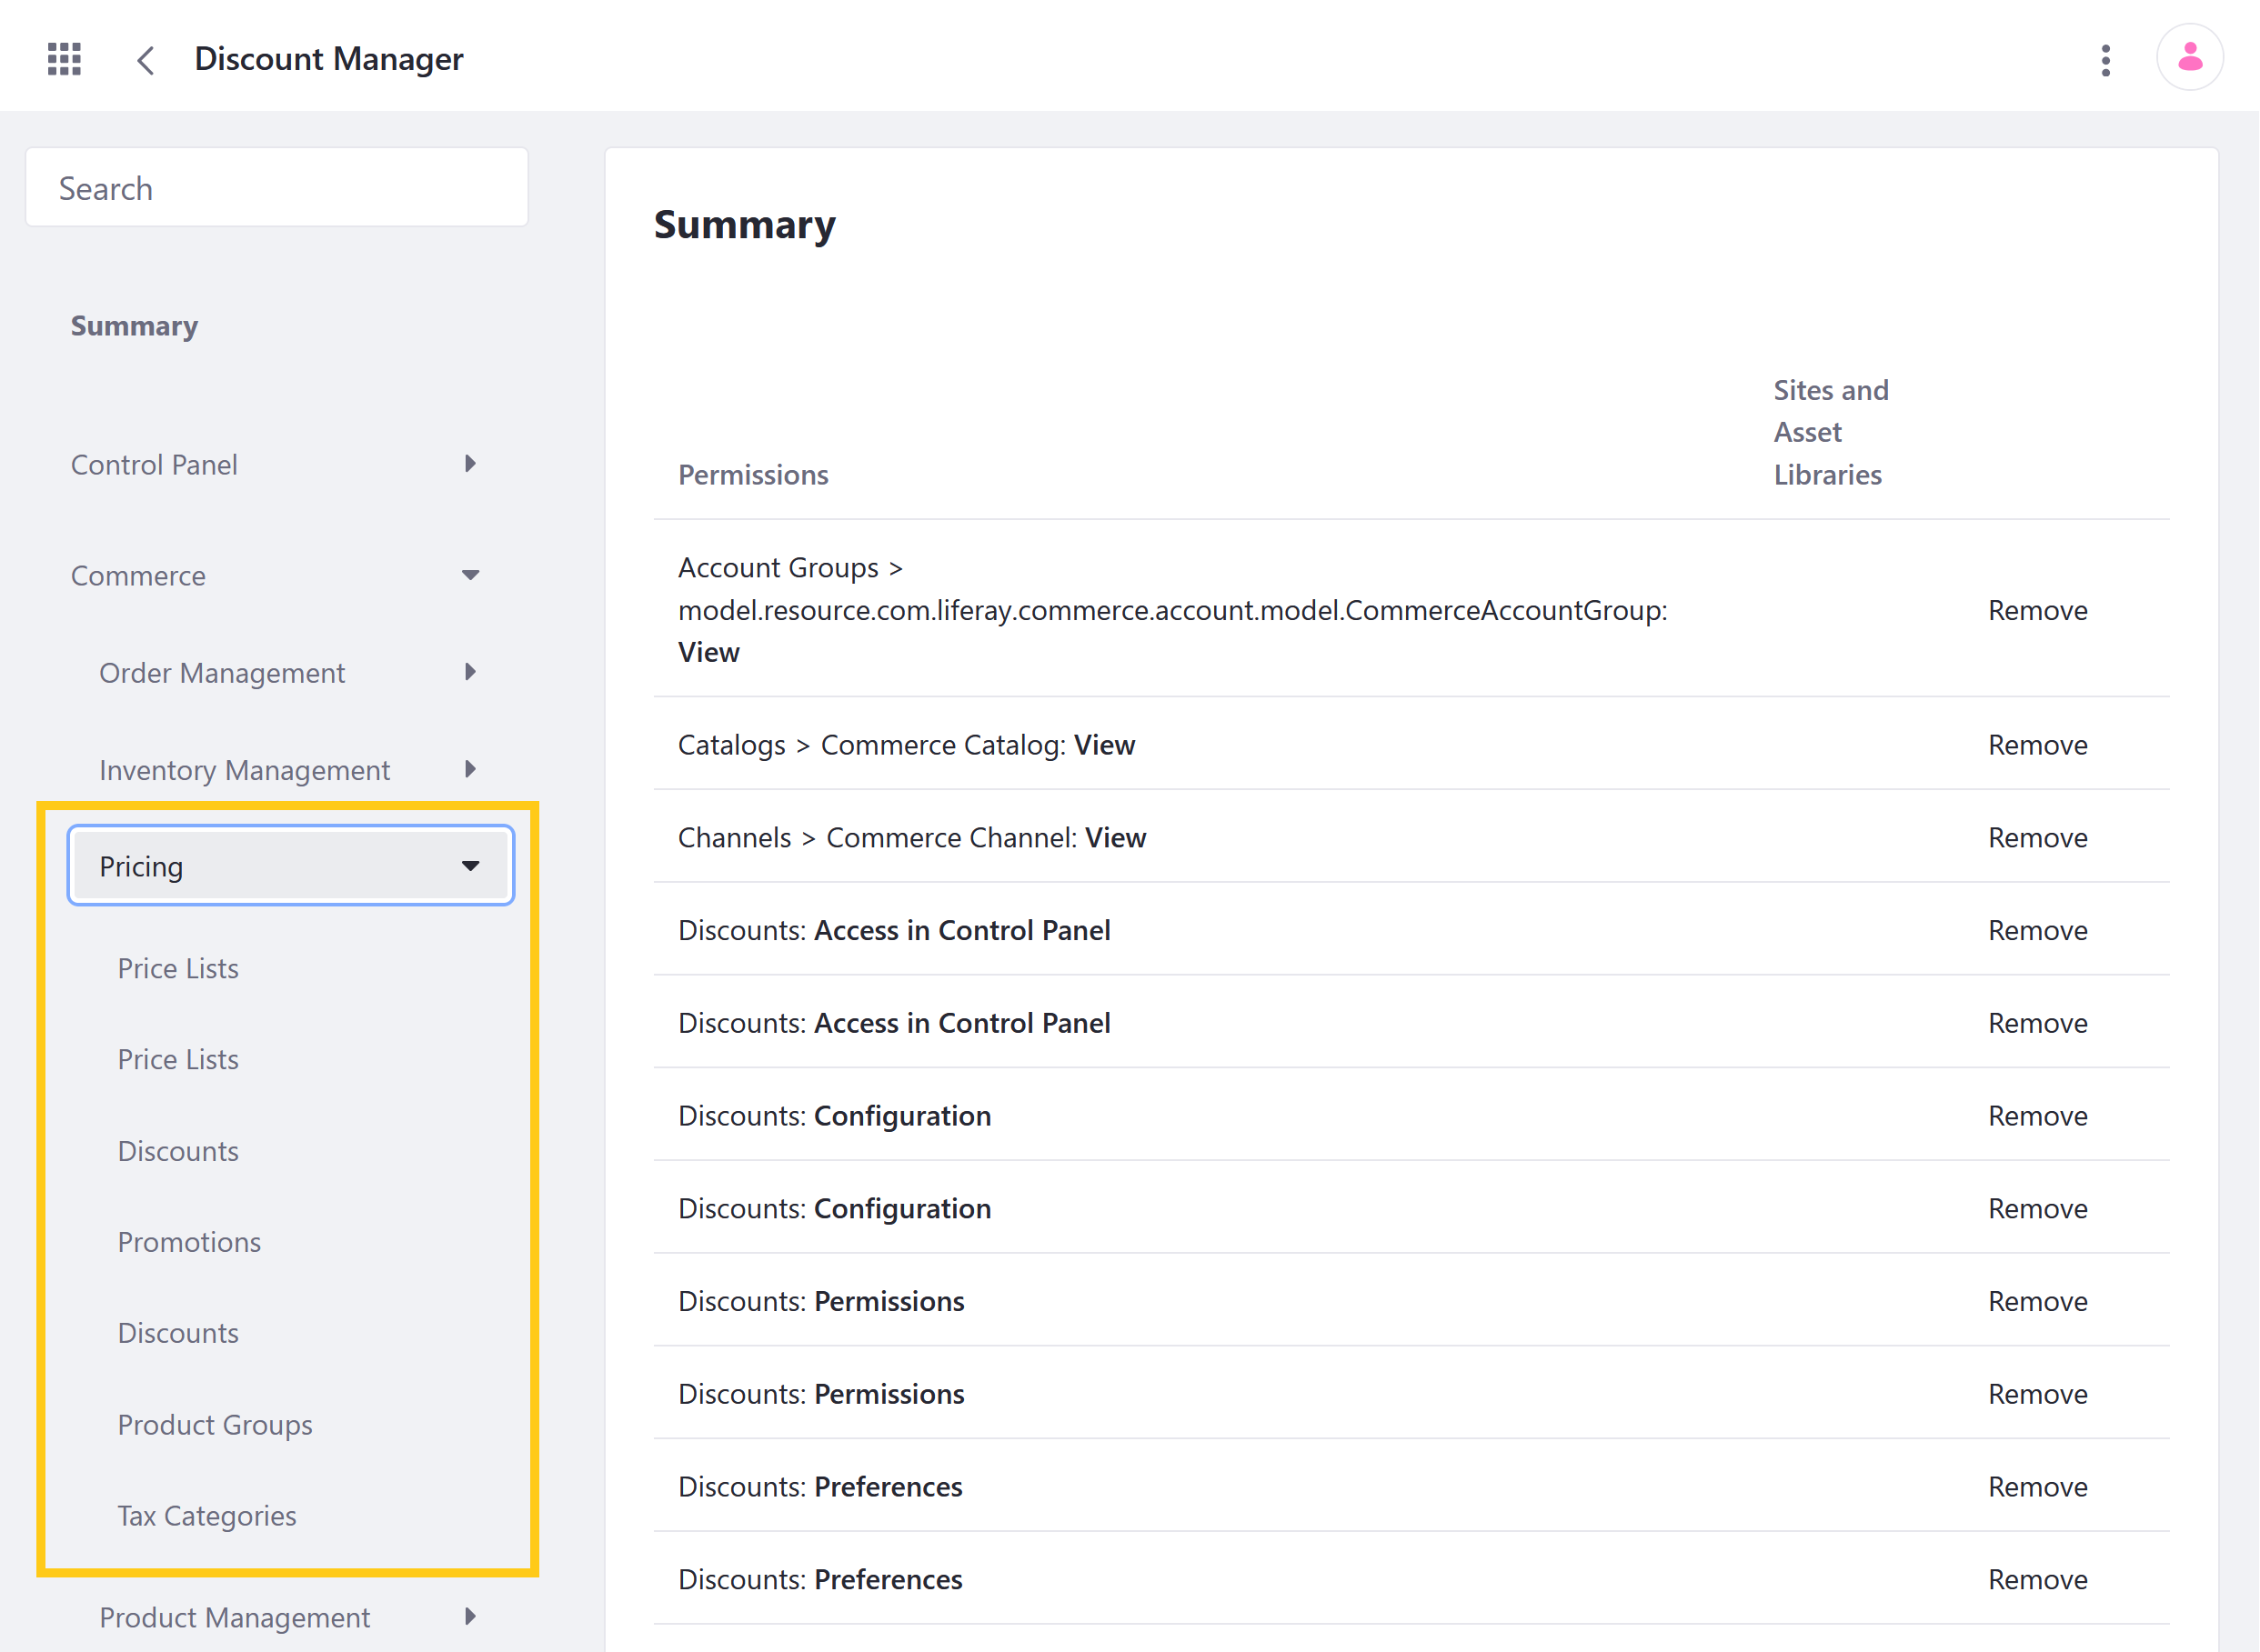 Manage Pricing permissions for user roles in the Define Permissions tab.